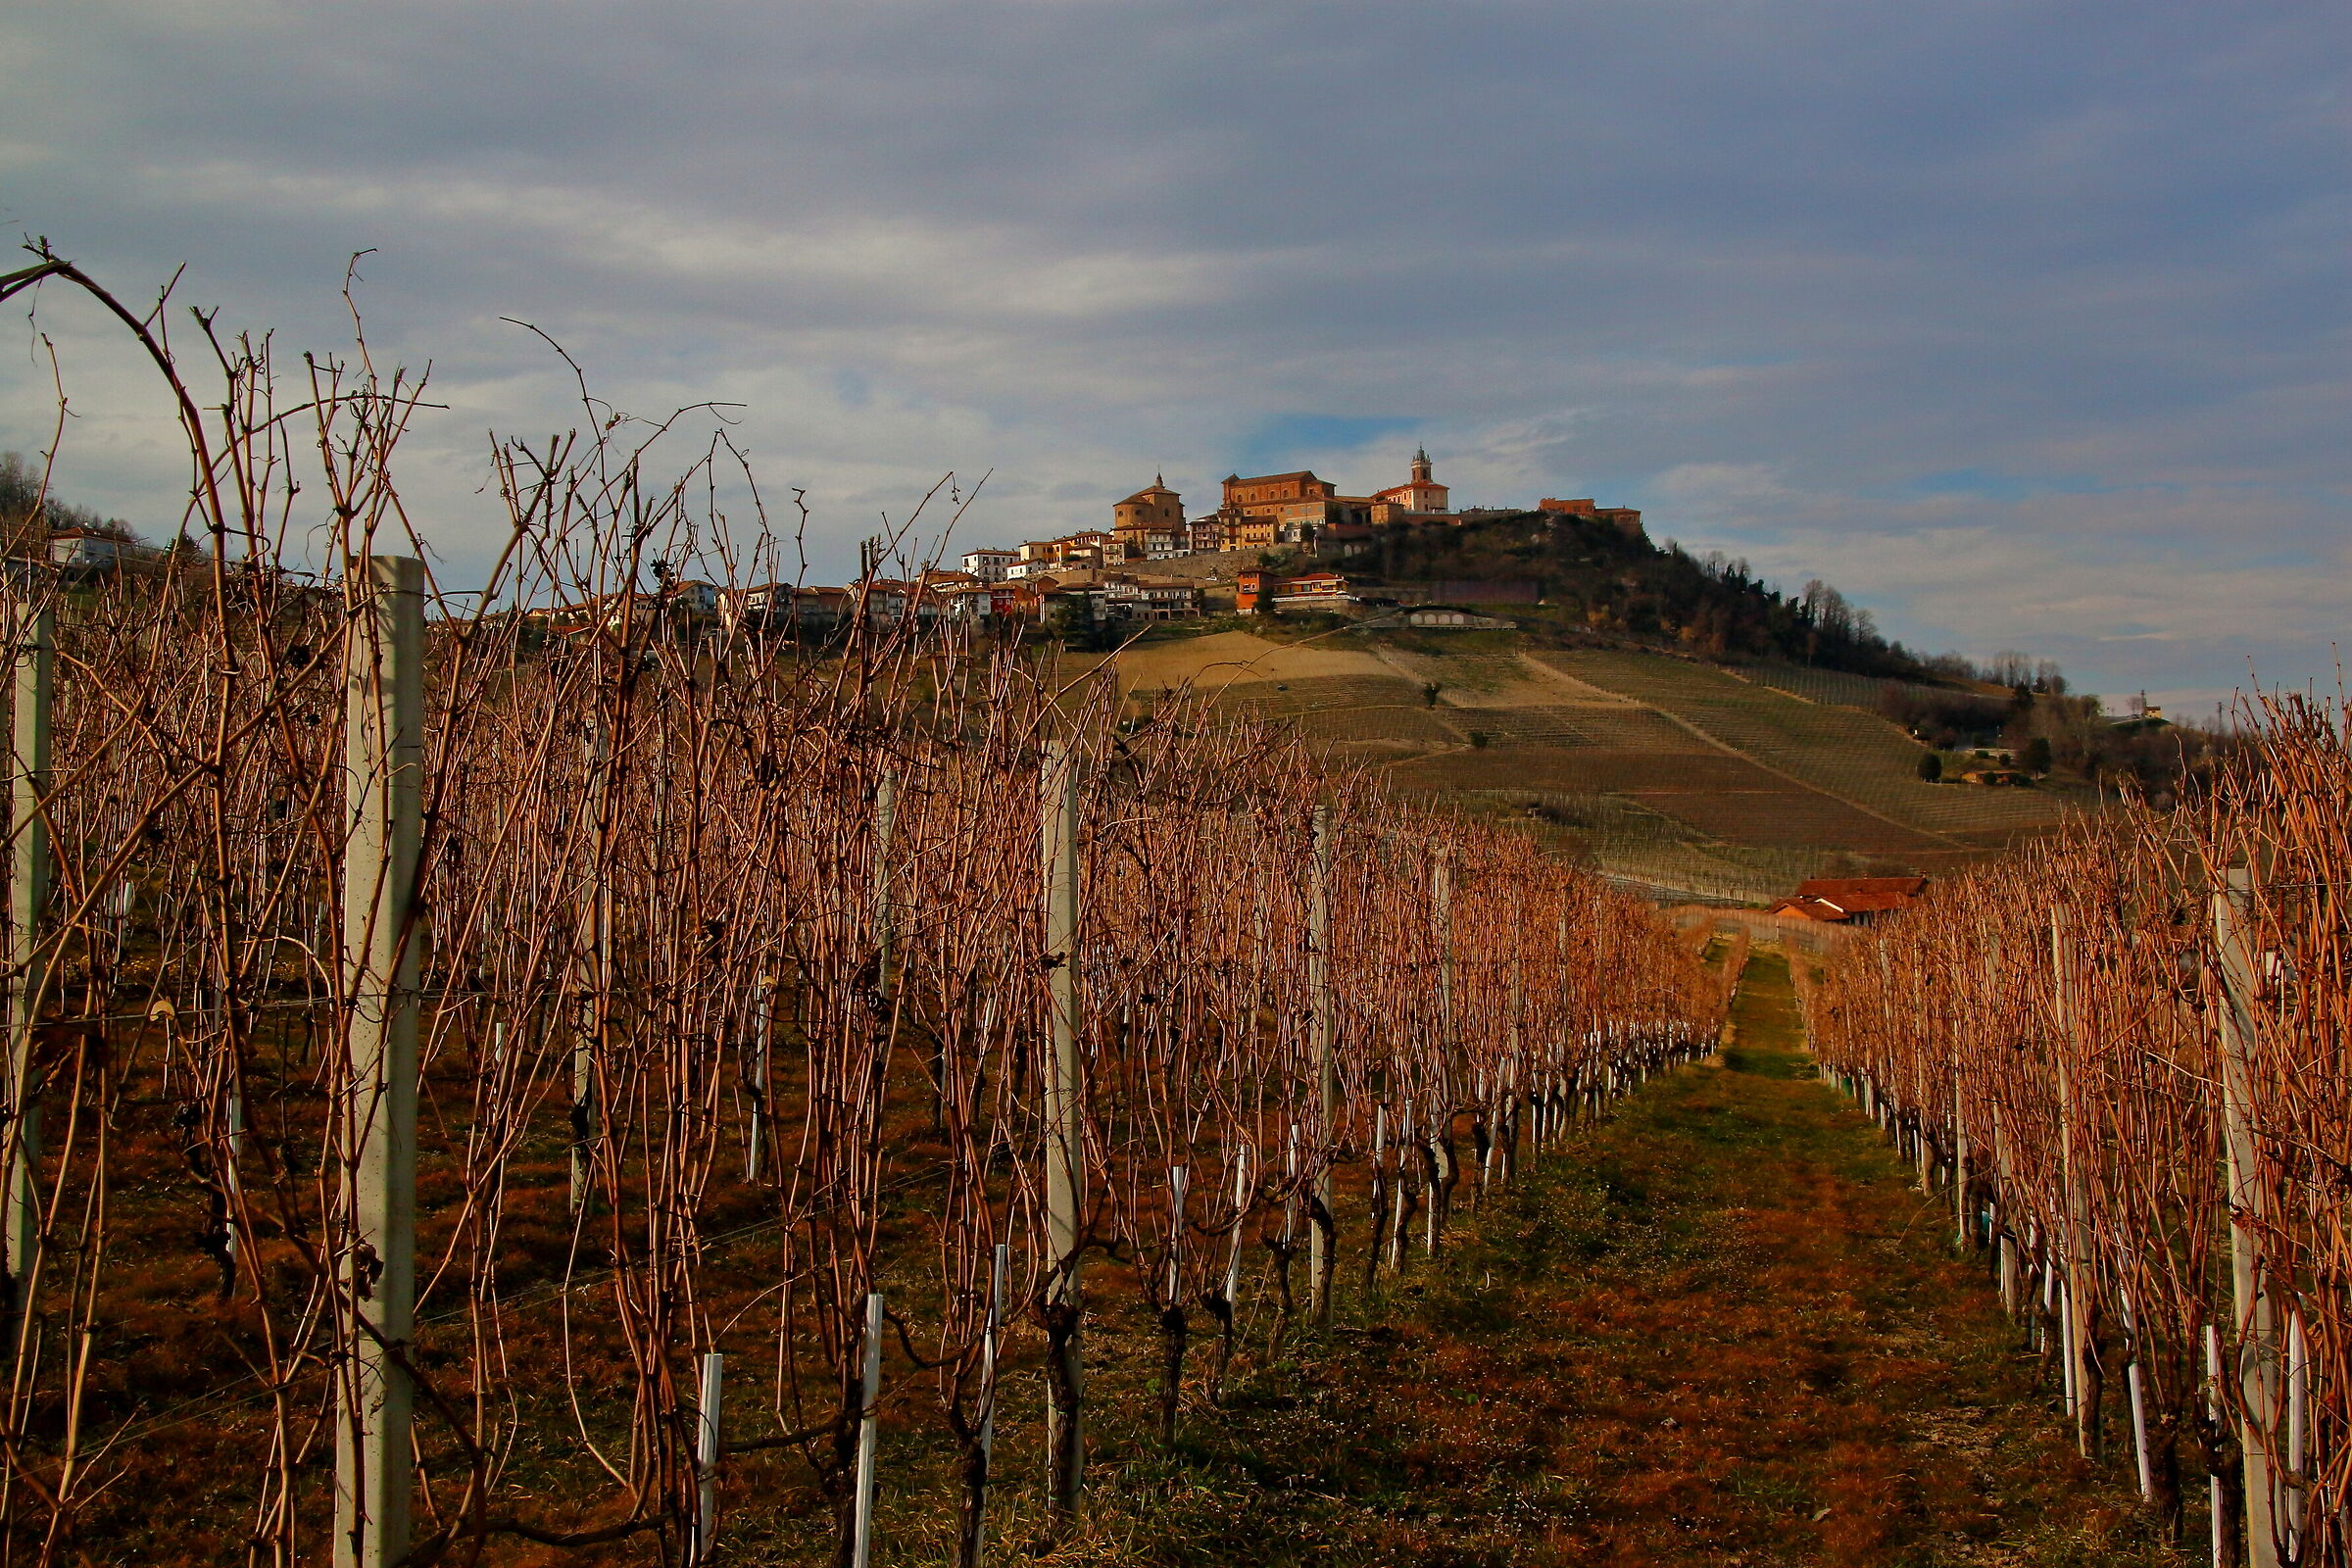 A glimpse of the Langhe...